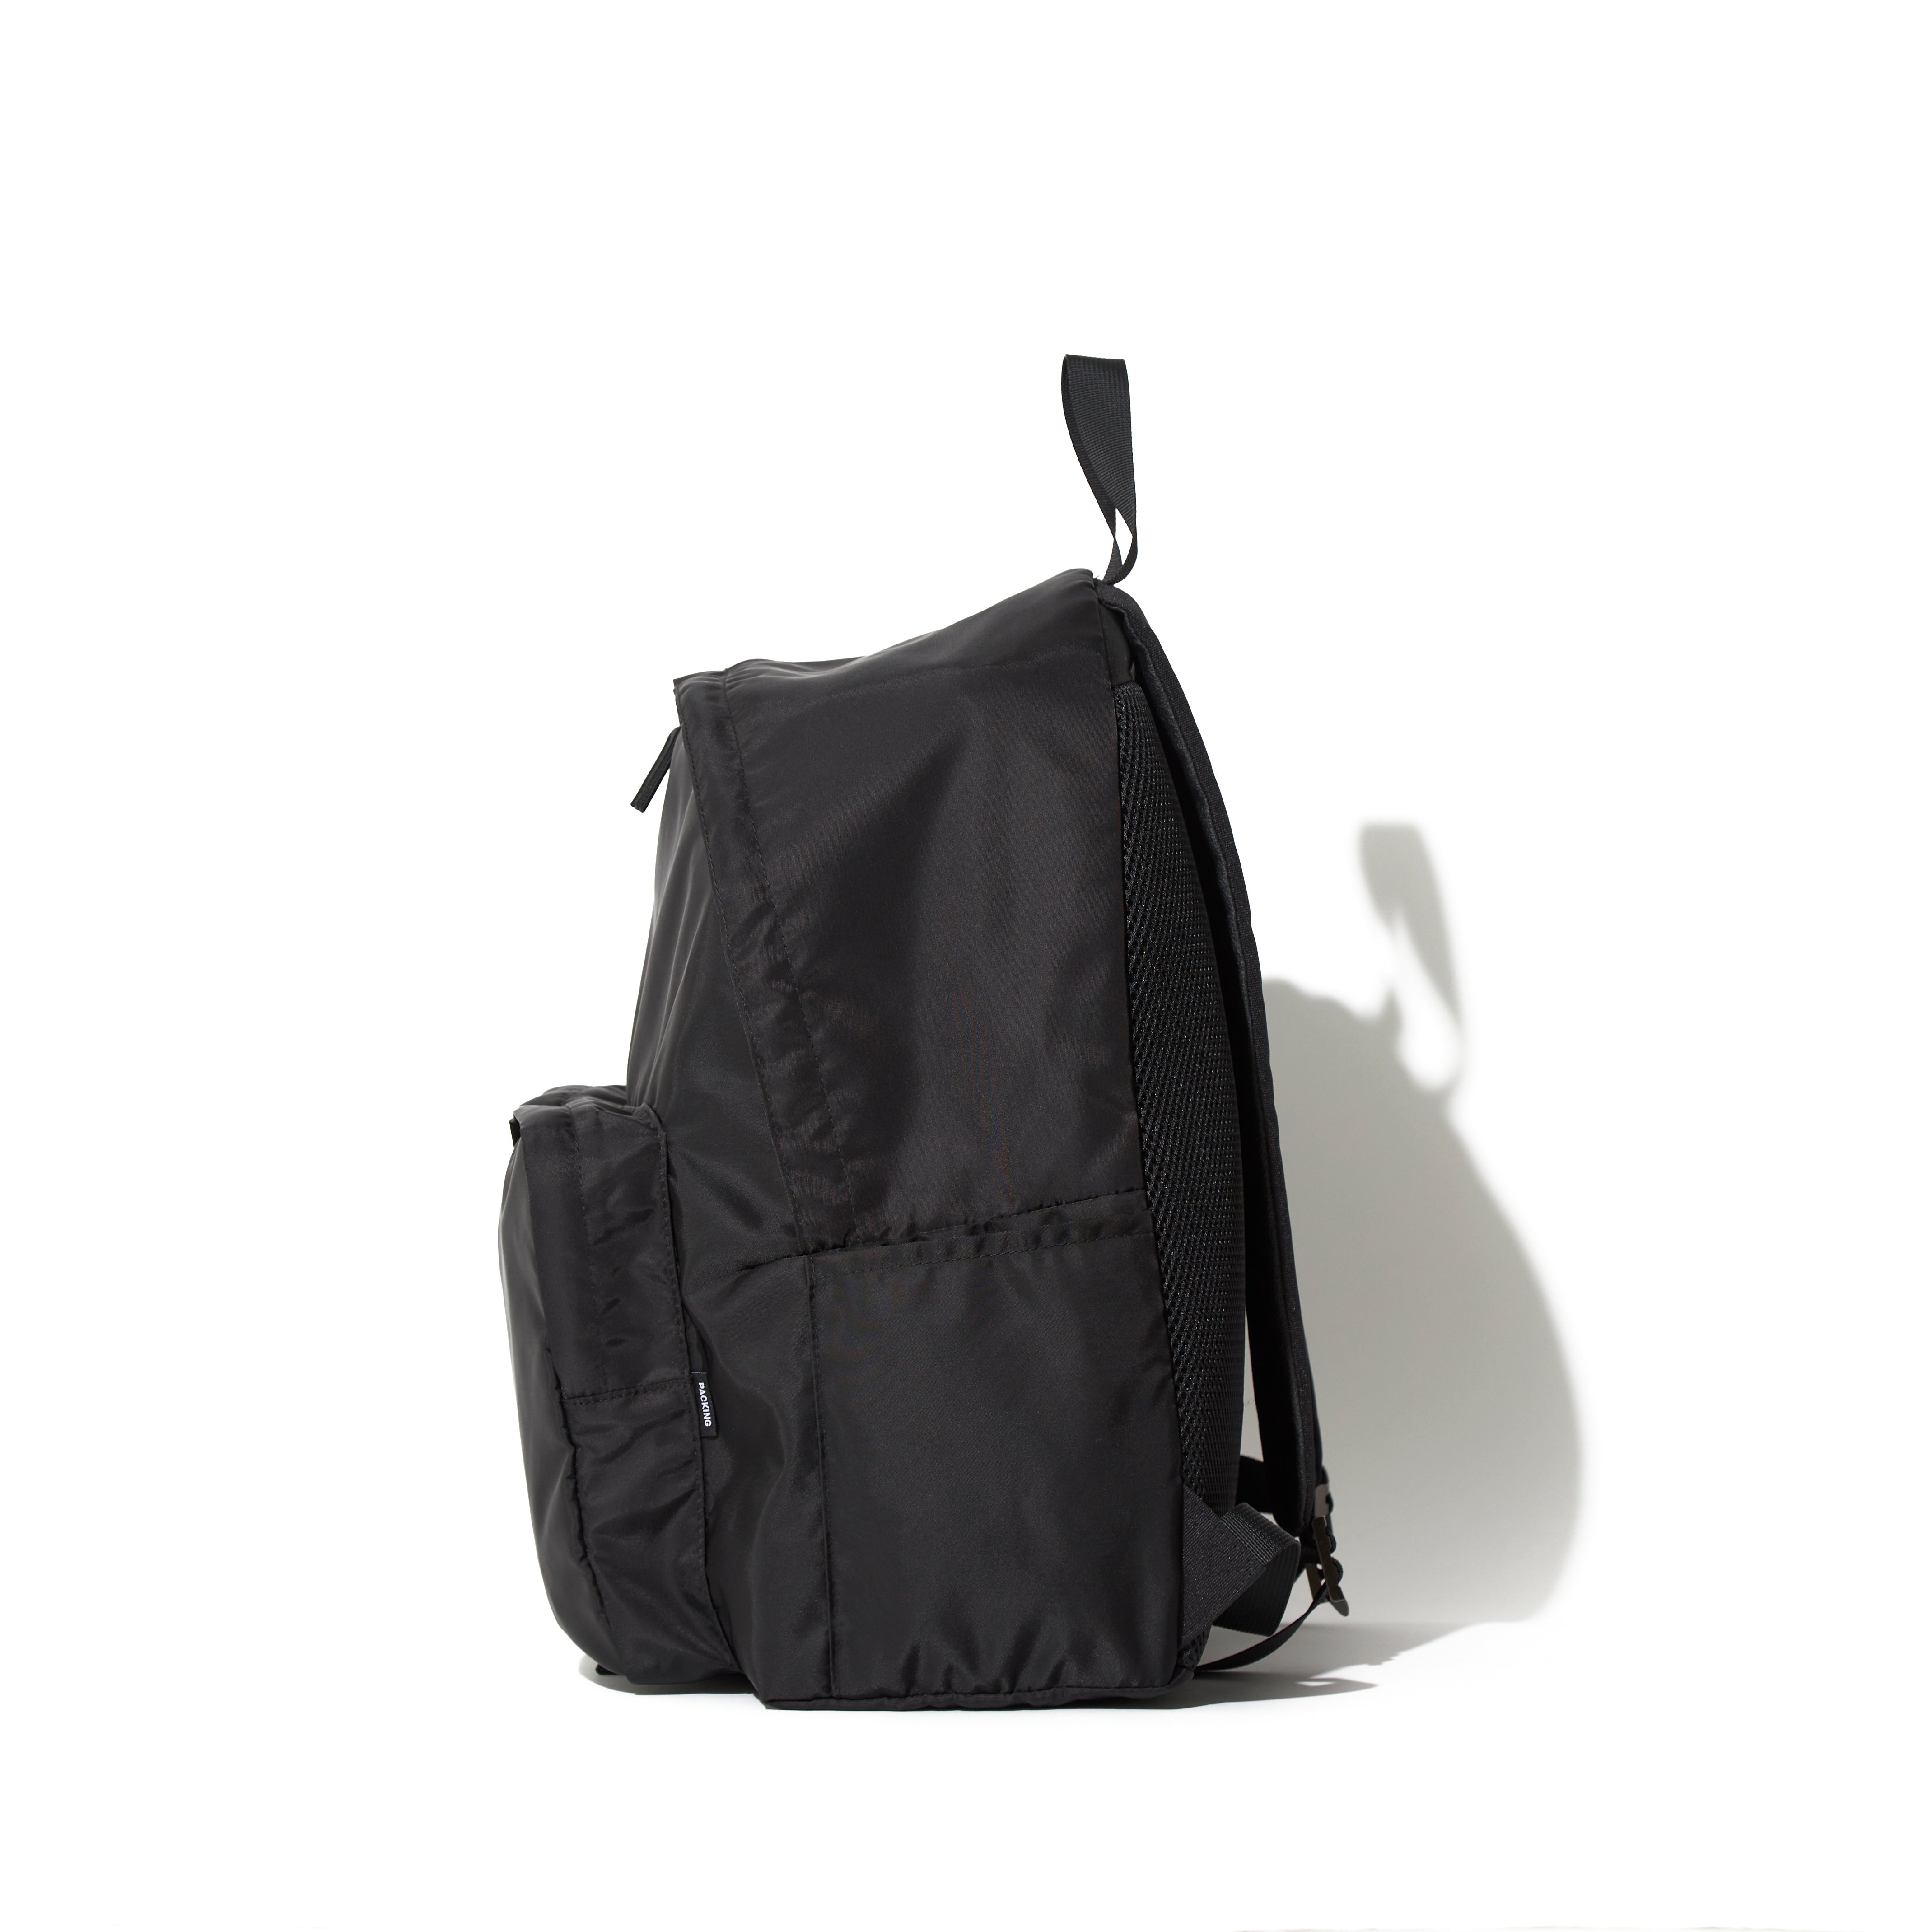 DOUBLE POCKET BACKPACK / PACKING